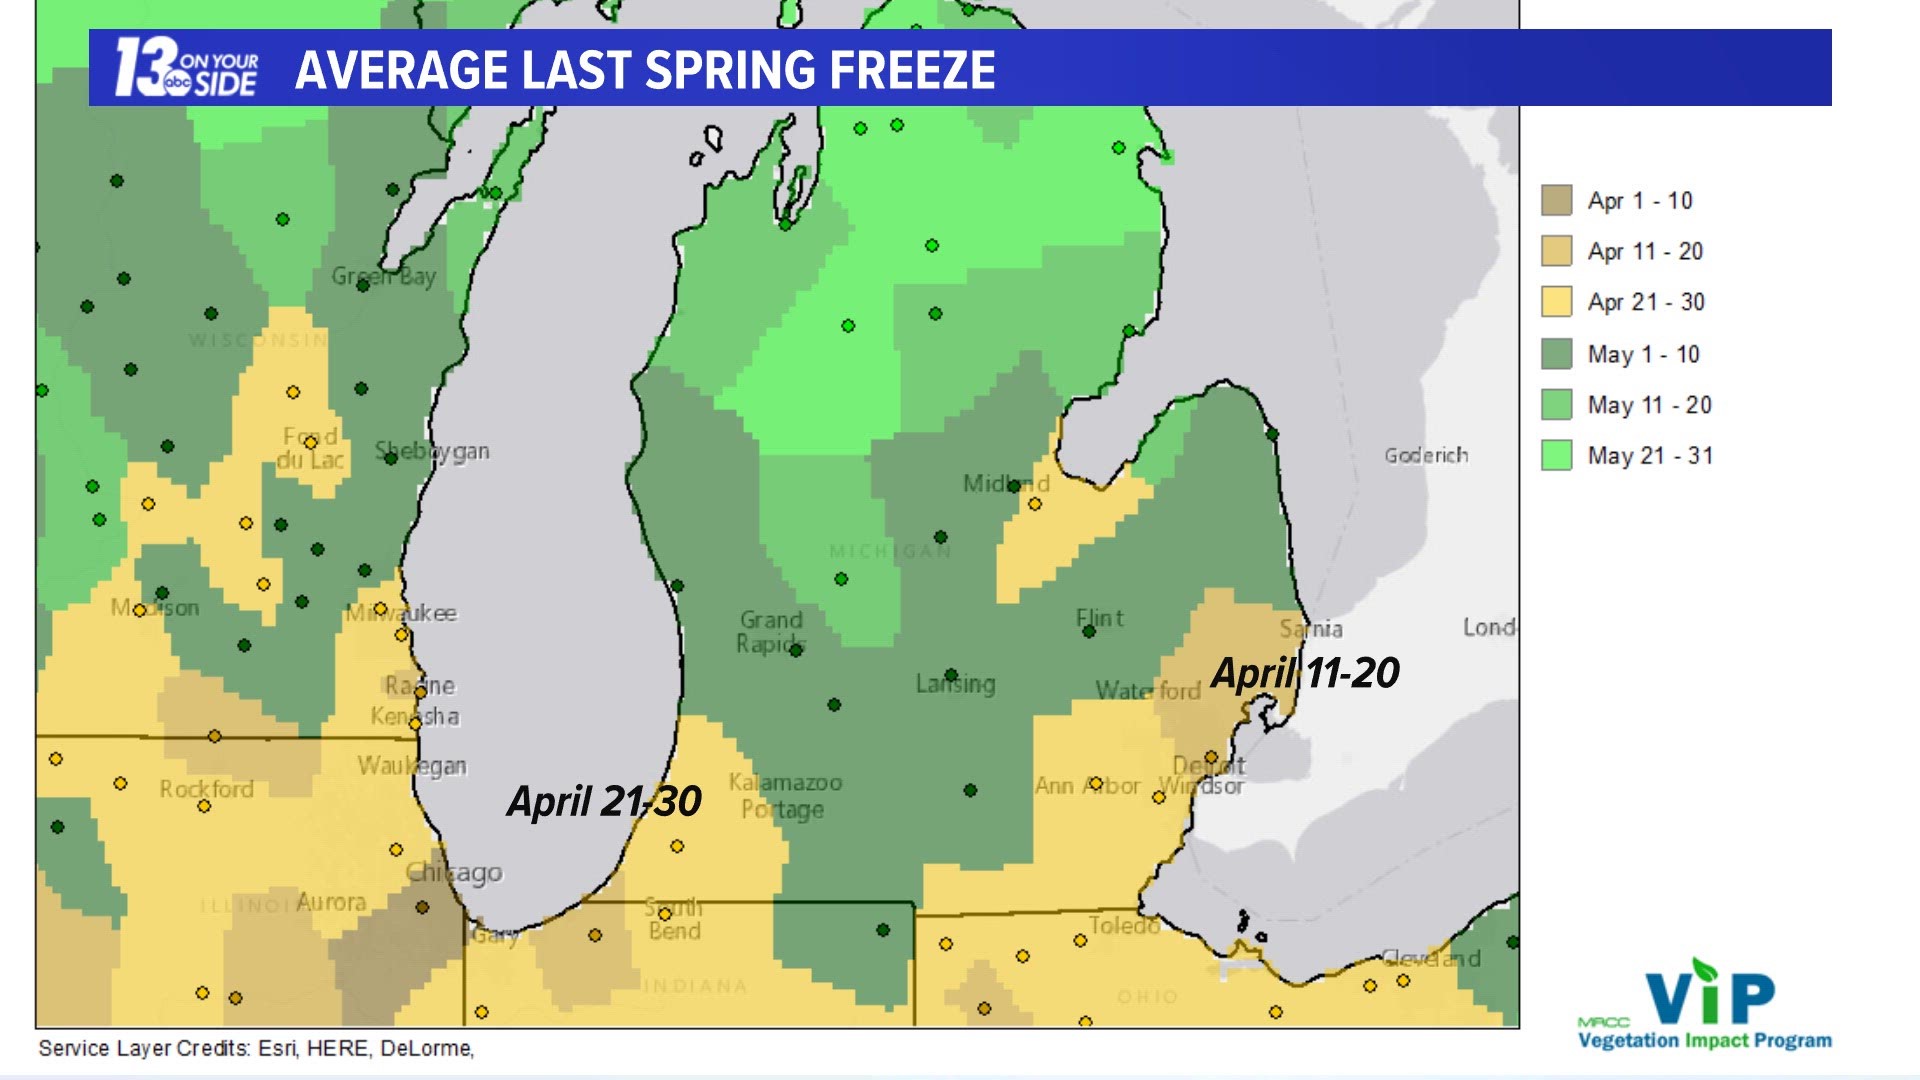 These are the average dates of the last spring freeze in West Michigan.